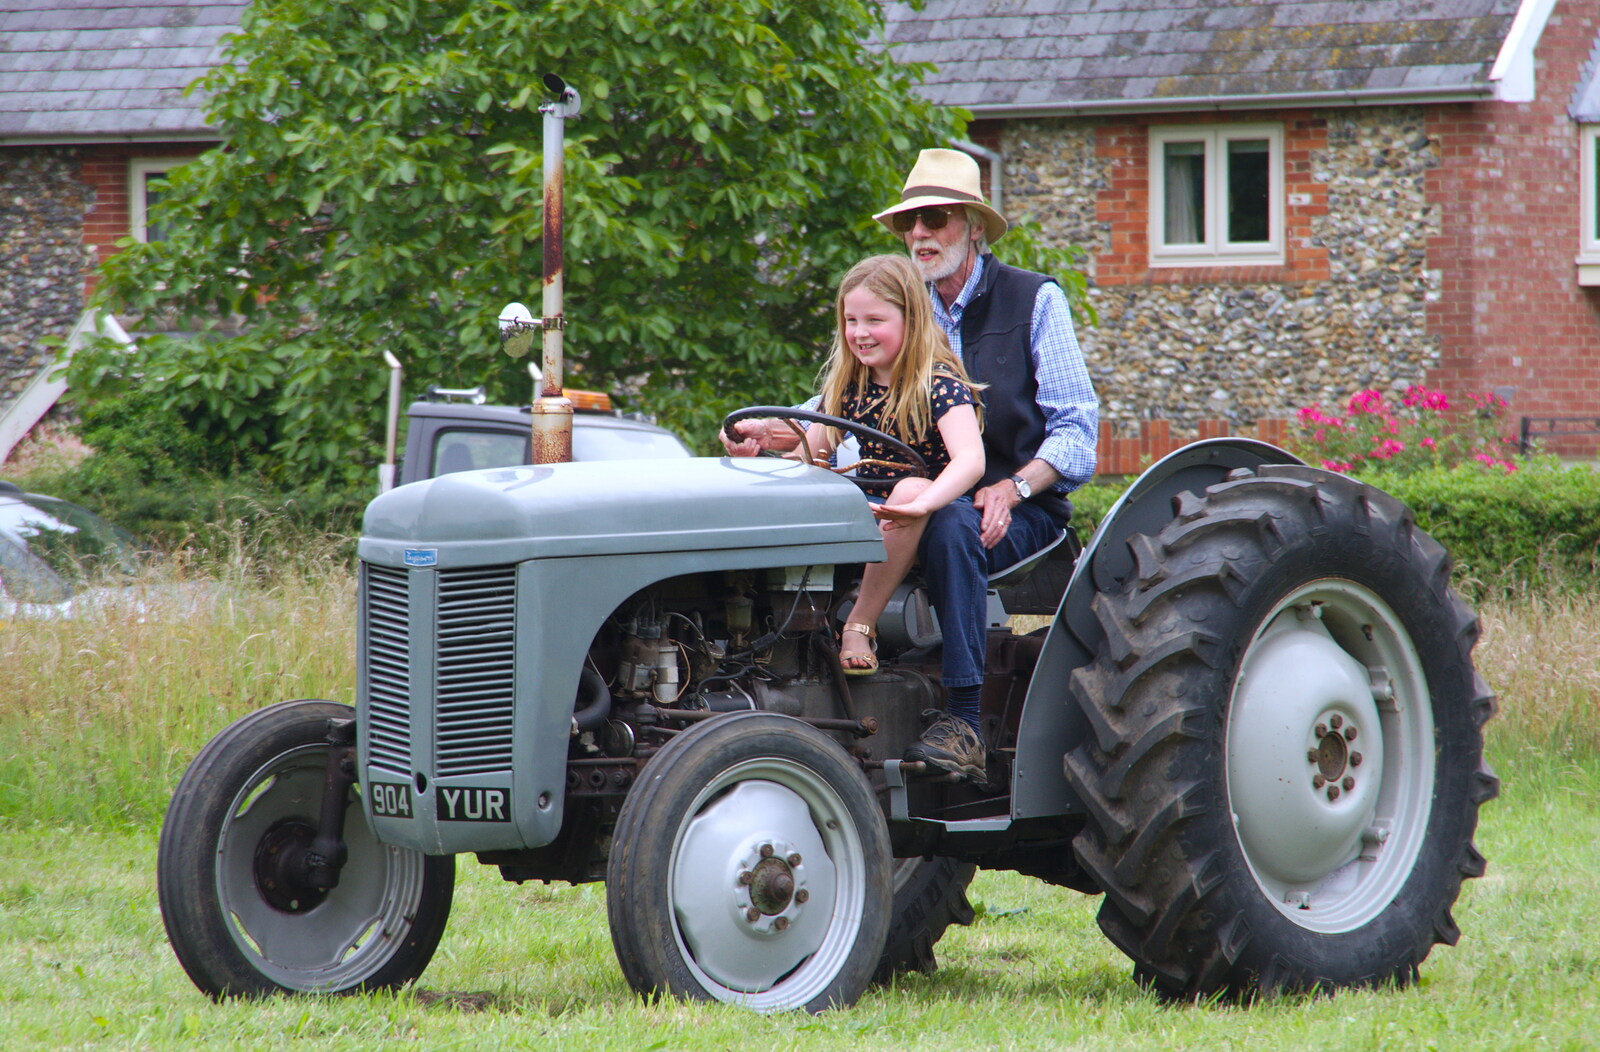 Another Fergie, and another ride from A Hog Roast on Little Green, Thrandeston, Suffolk - 23rd June 2019